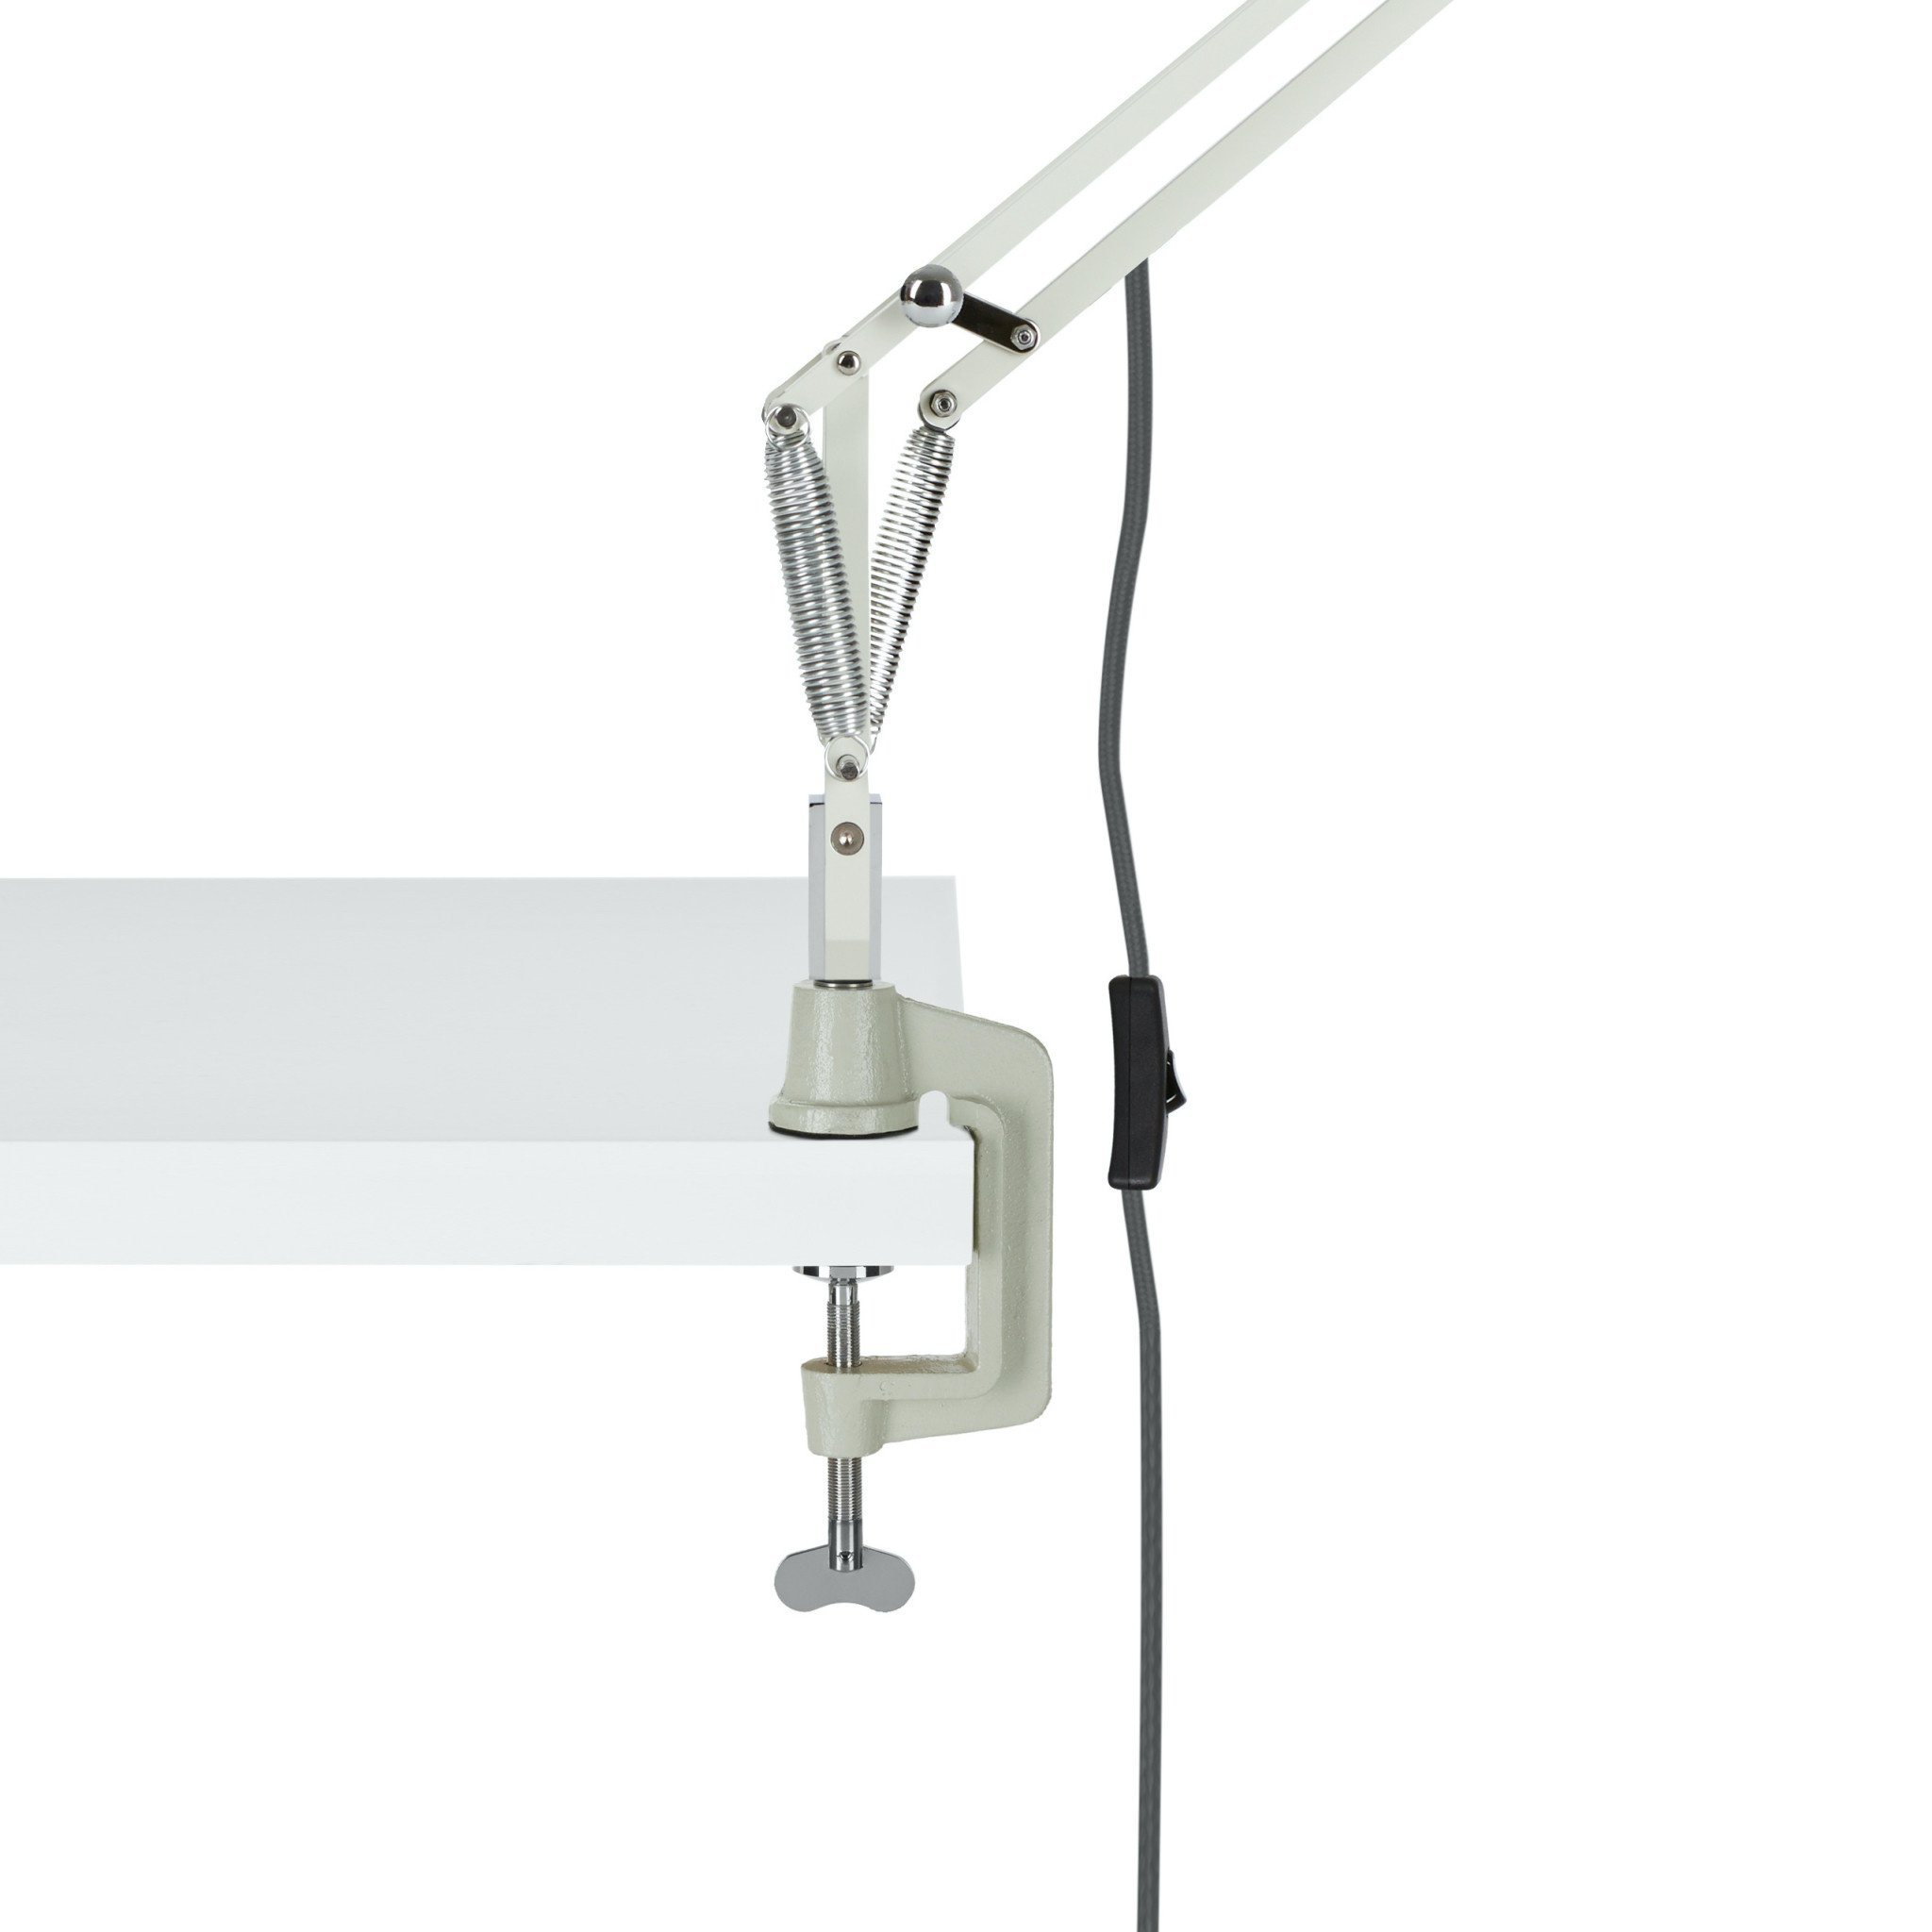 Anglepoise PREORDER Desk Mount Clamp for Original 1227 Series Lamps - Linen White